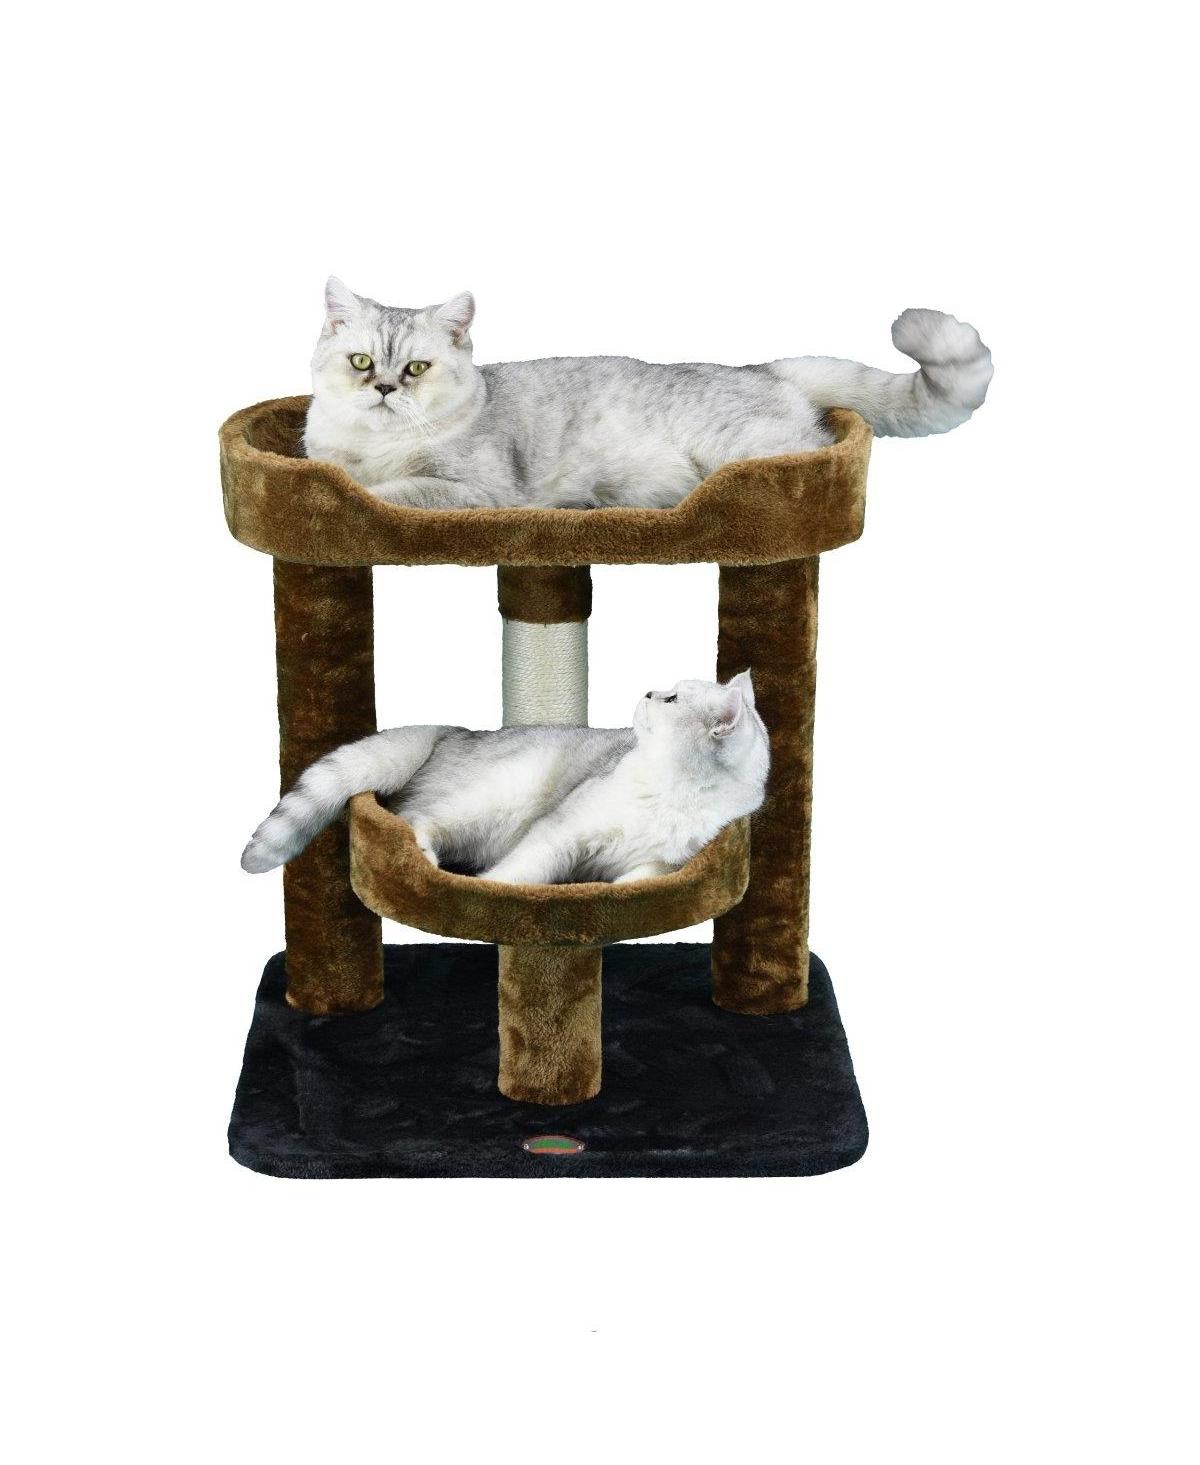 F3028 23 in. Cat Tree Perch with Large Perch F3109, Brown & Black - Black